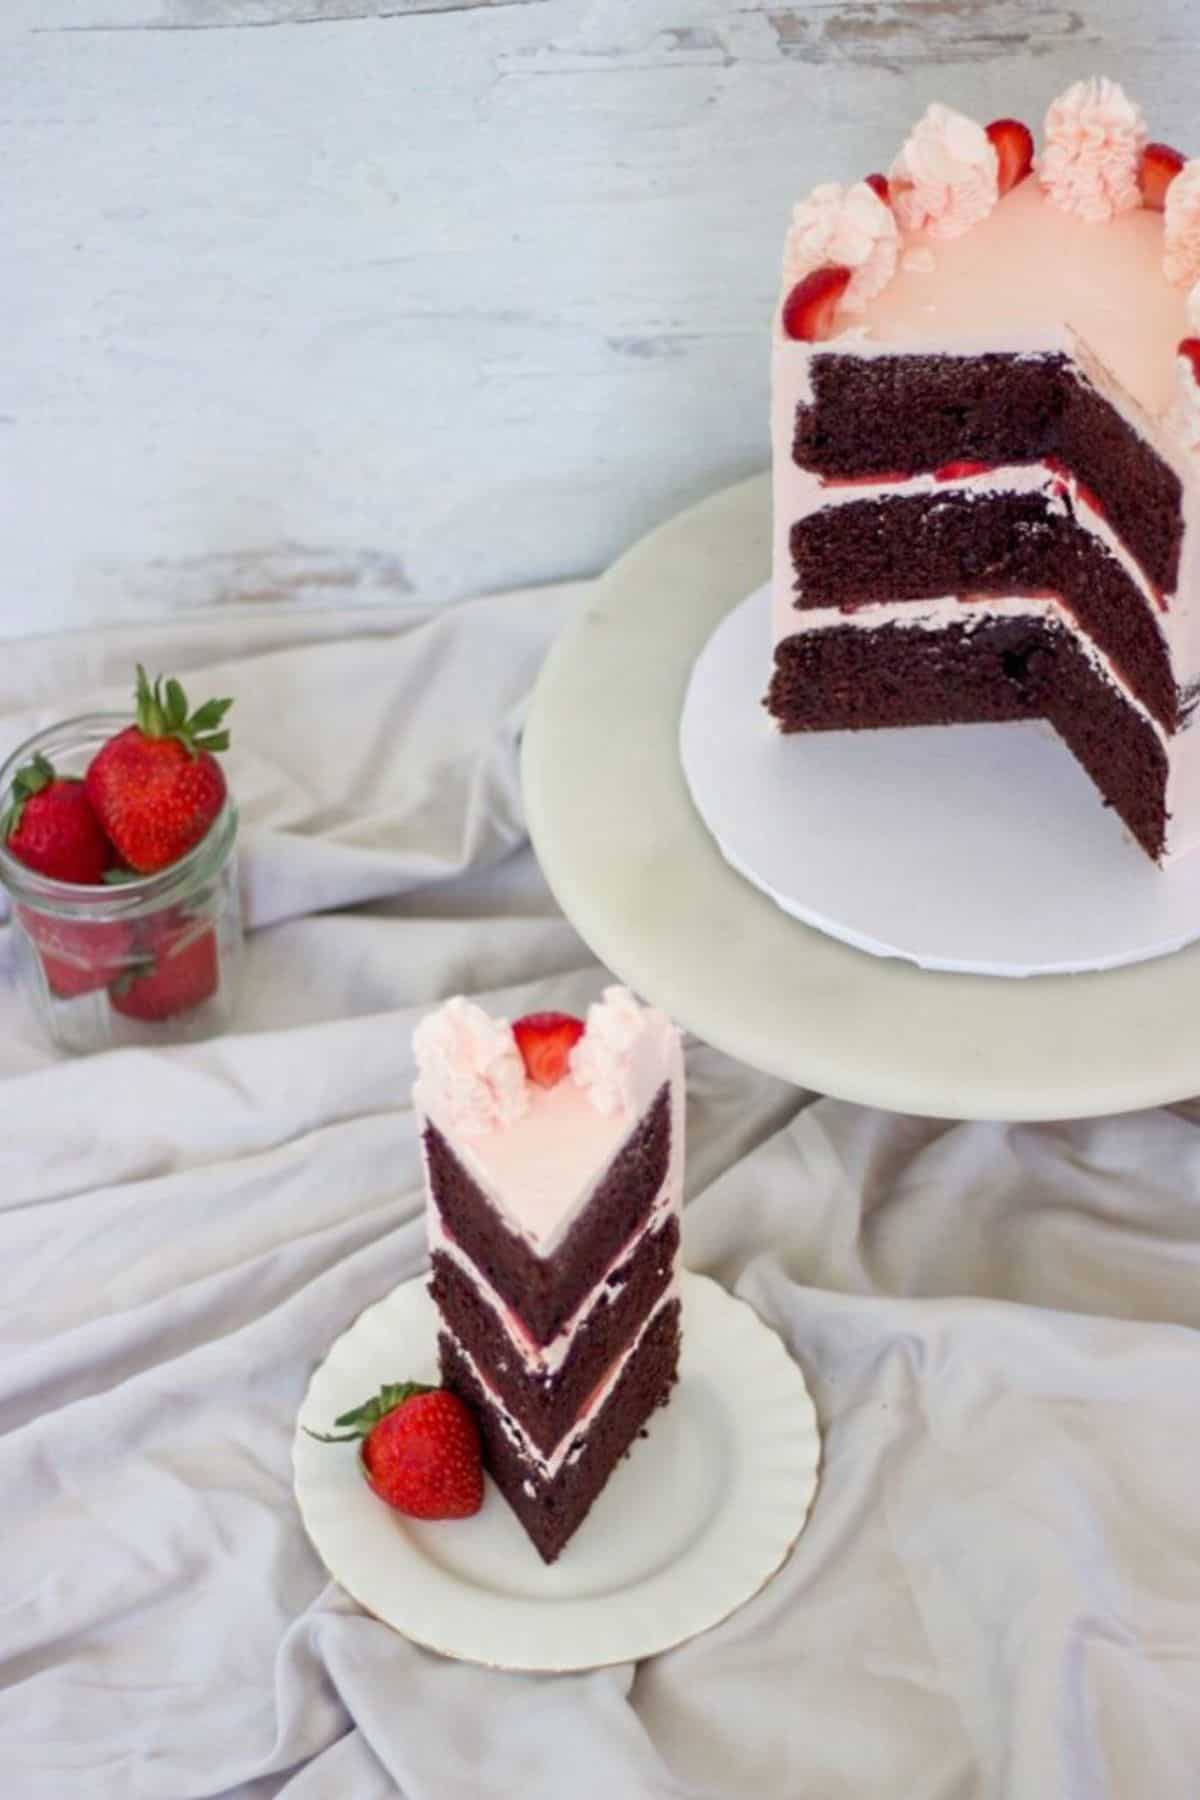 cake with a slice cut out